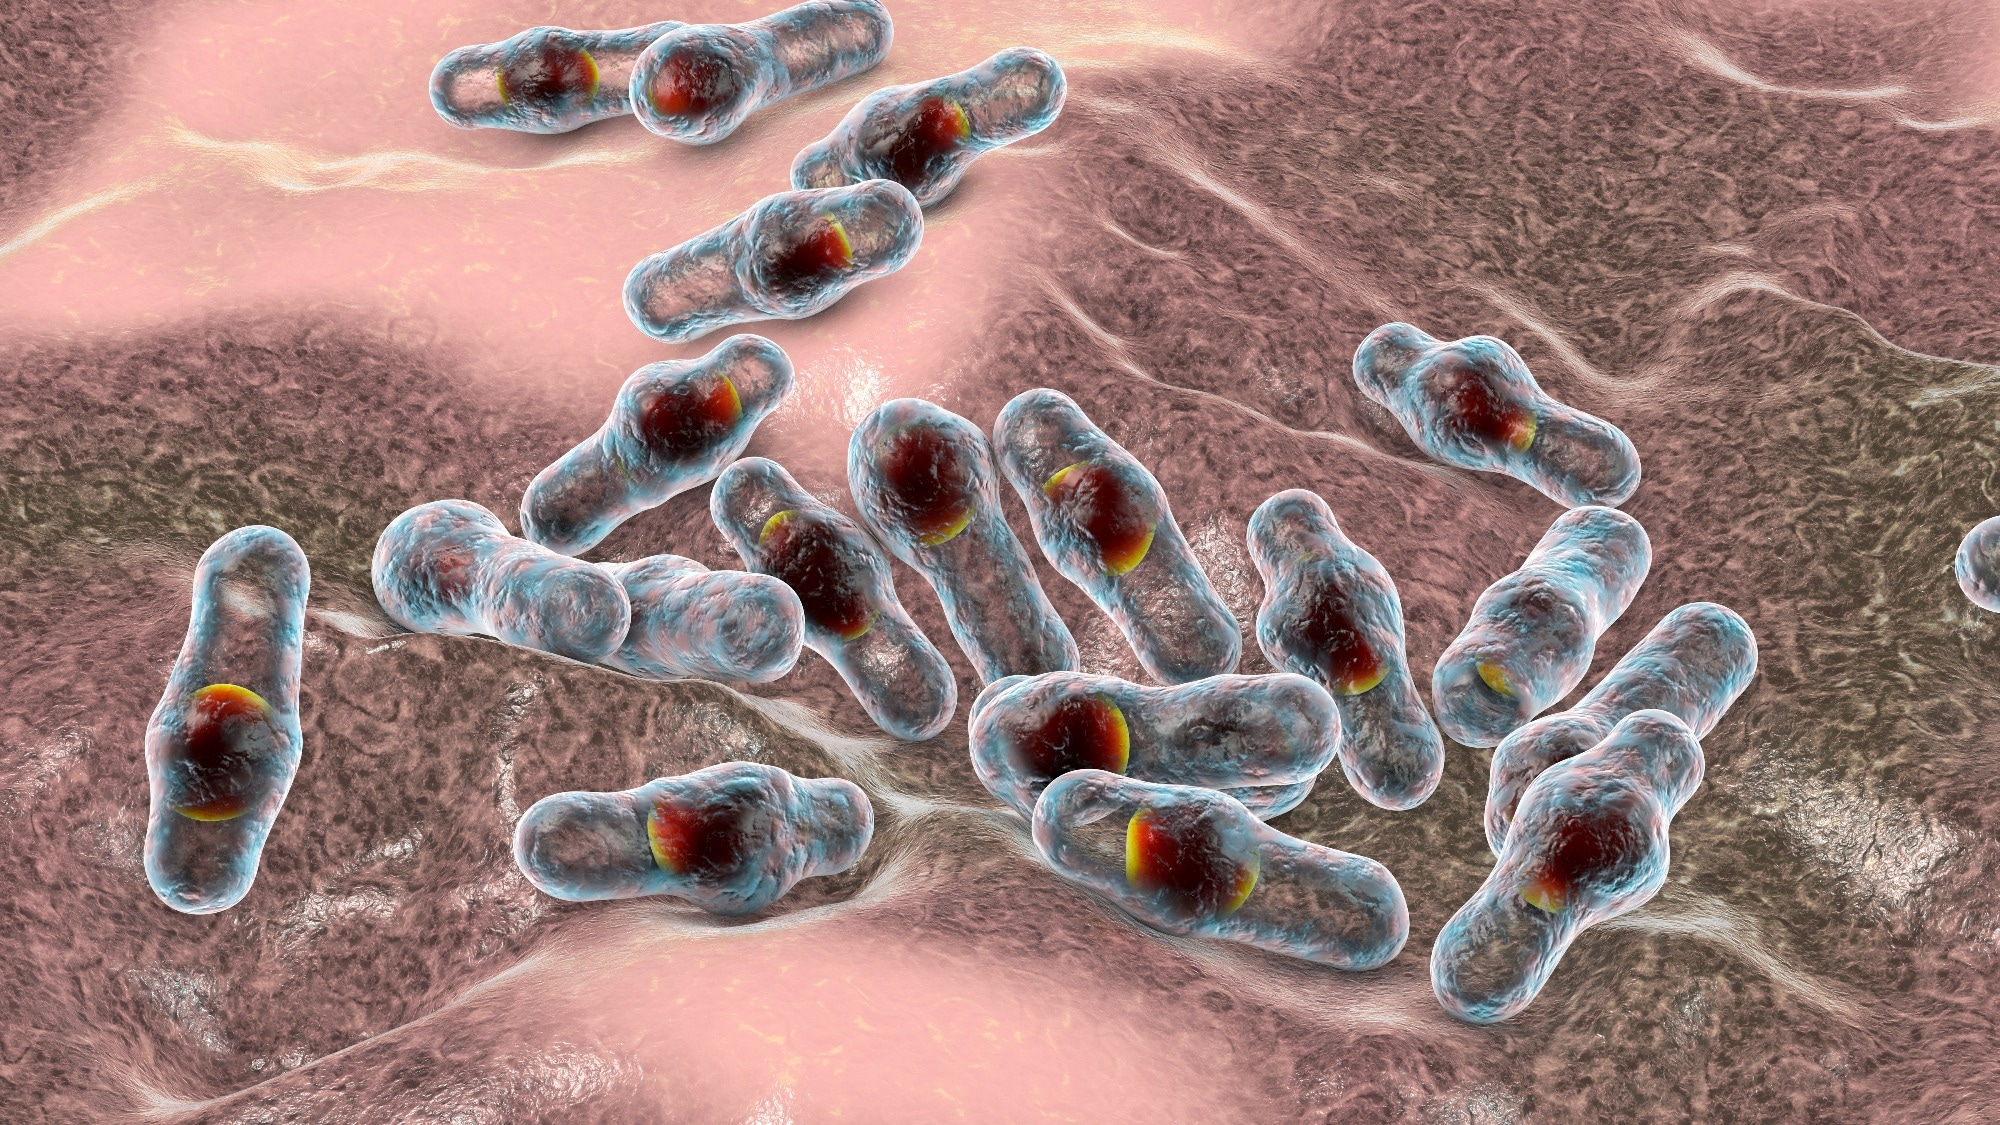 Study: A large travel-associated outbreak of iatrogenic botulism in four European countries following intragastric botulinum neurotoxin injections for weight reduction, Türkiye, February to March 2023. Image Credit: Kateryna Kon / Shutterstock.com